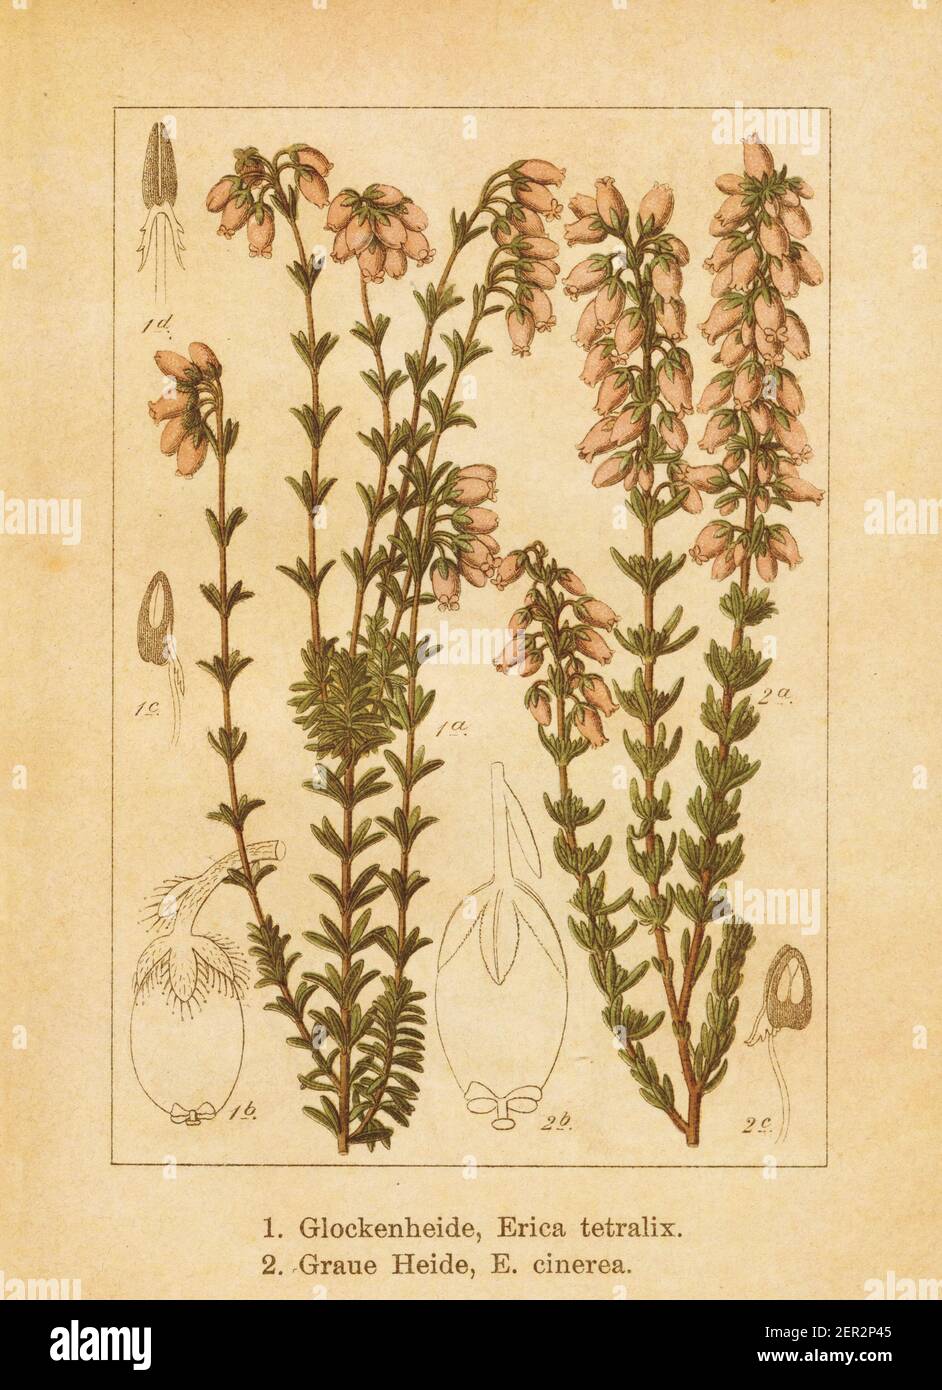 Antique illustration of an erica tetralix (also known as cross-leaved heath or crossleaf heath) and erica cinerea (also known as bell heather, heather Stock Photo